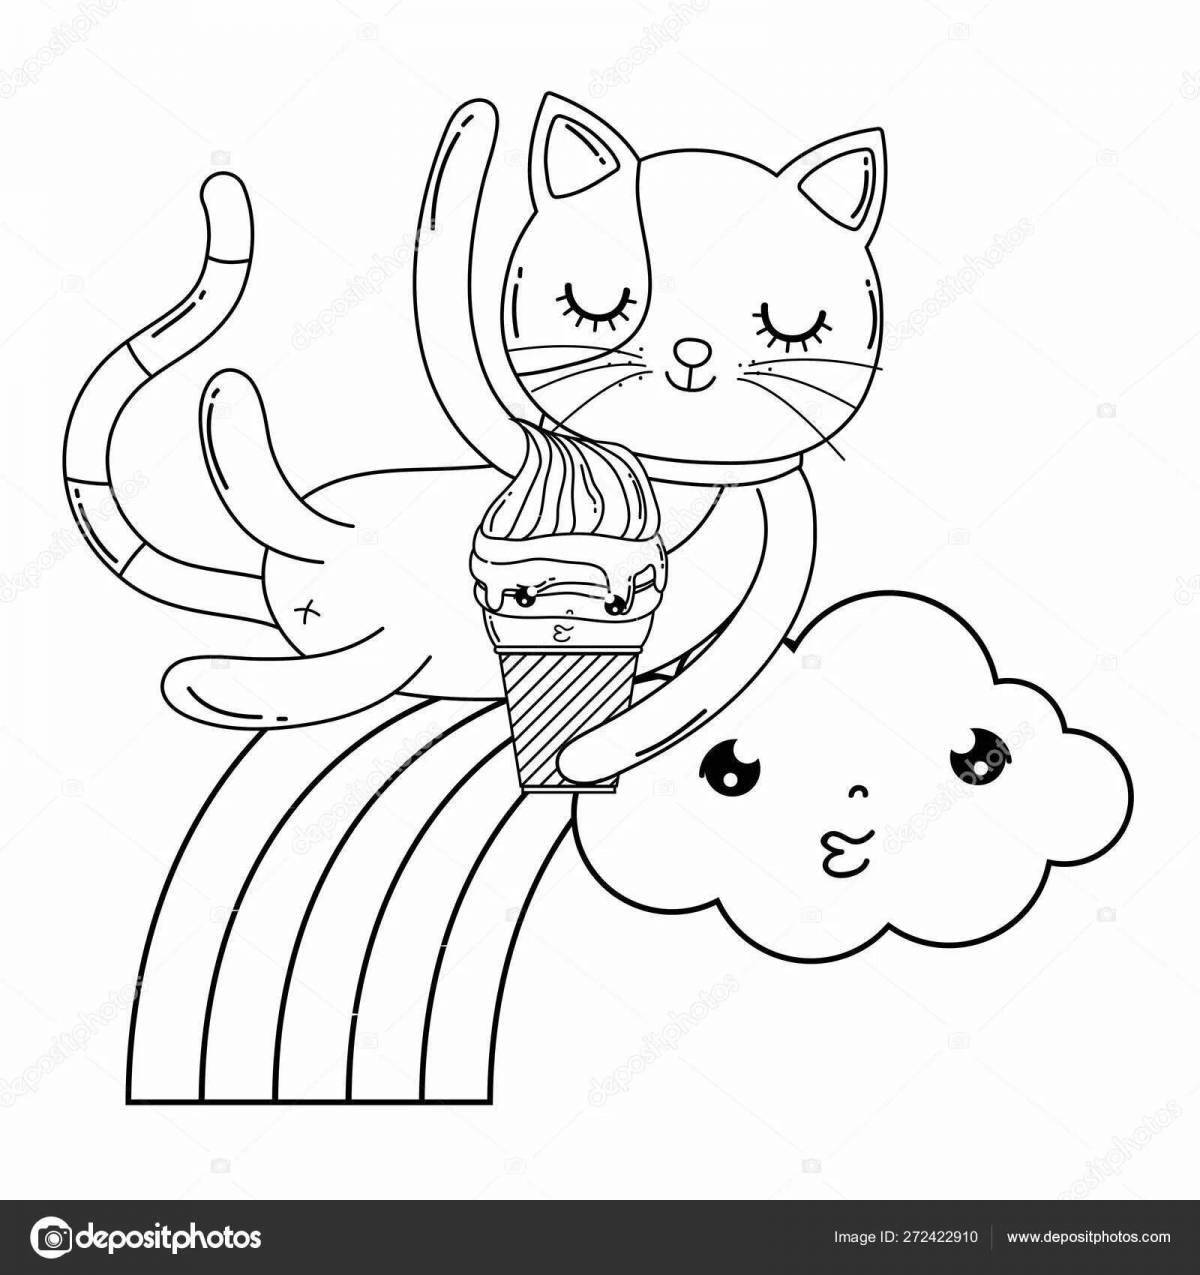 Coloring page happy rainbow kitten